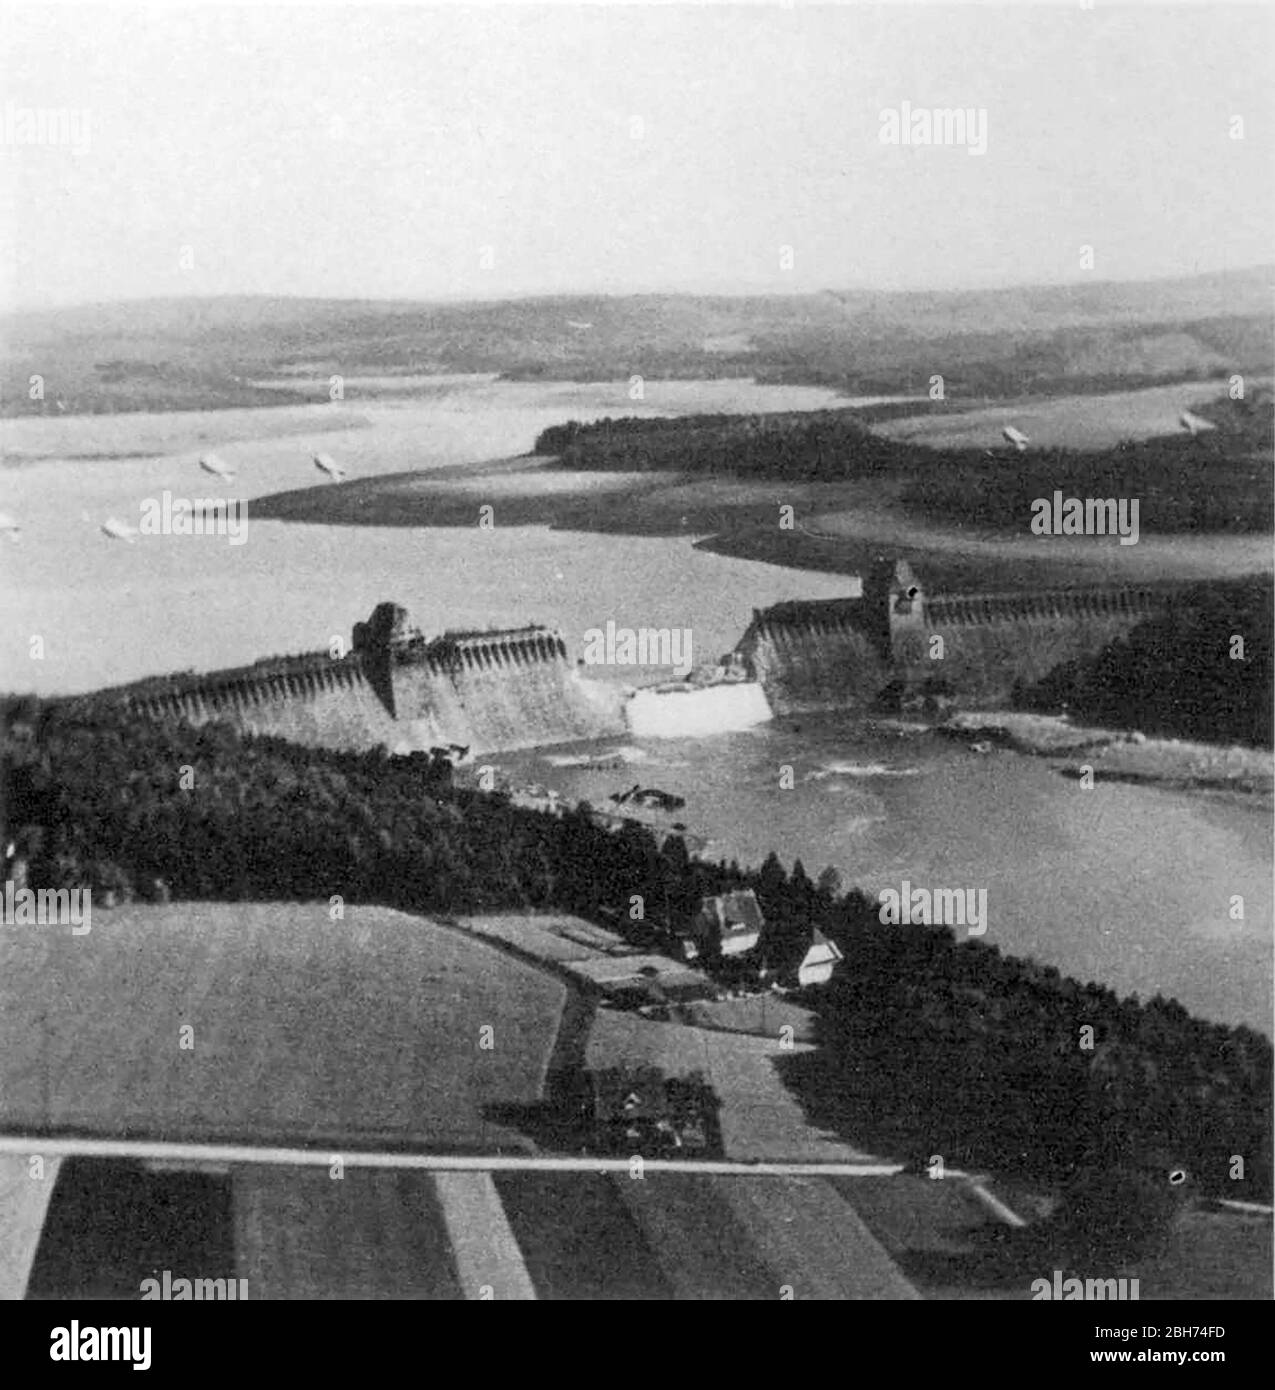 MÖHNE DAM breached by Lancaster bombers from RAF 617 Squadron during Operation Chastise 16-17 May 1943. Reconnaissance photo by F/O Jerry Fray 542  Squadron from his Spitfire PR IX. Note barrage balloons above dam. Stock Photo